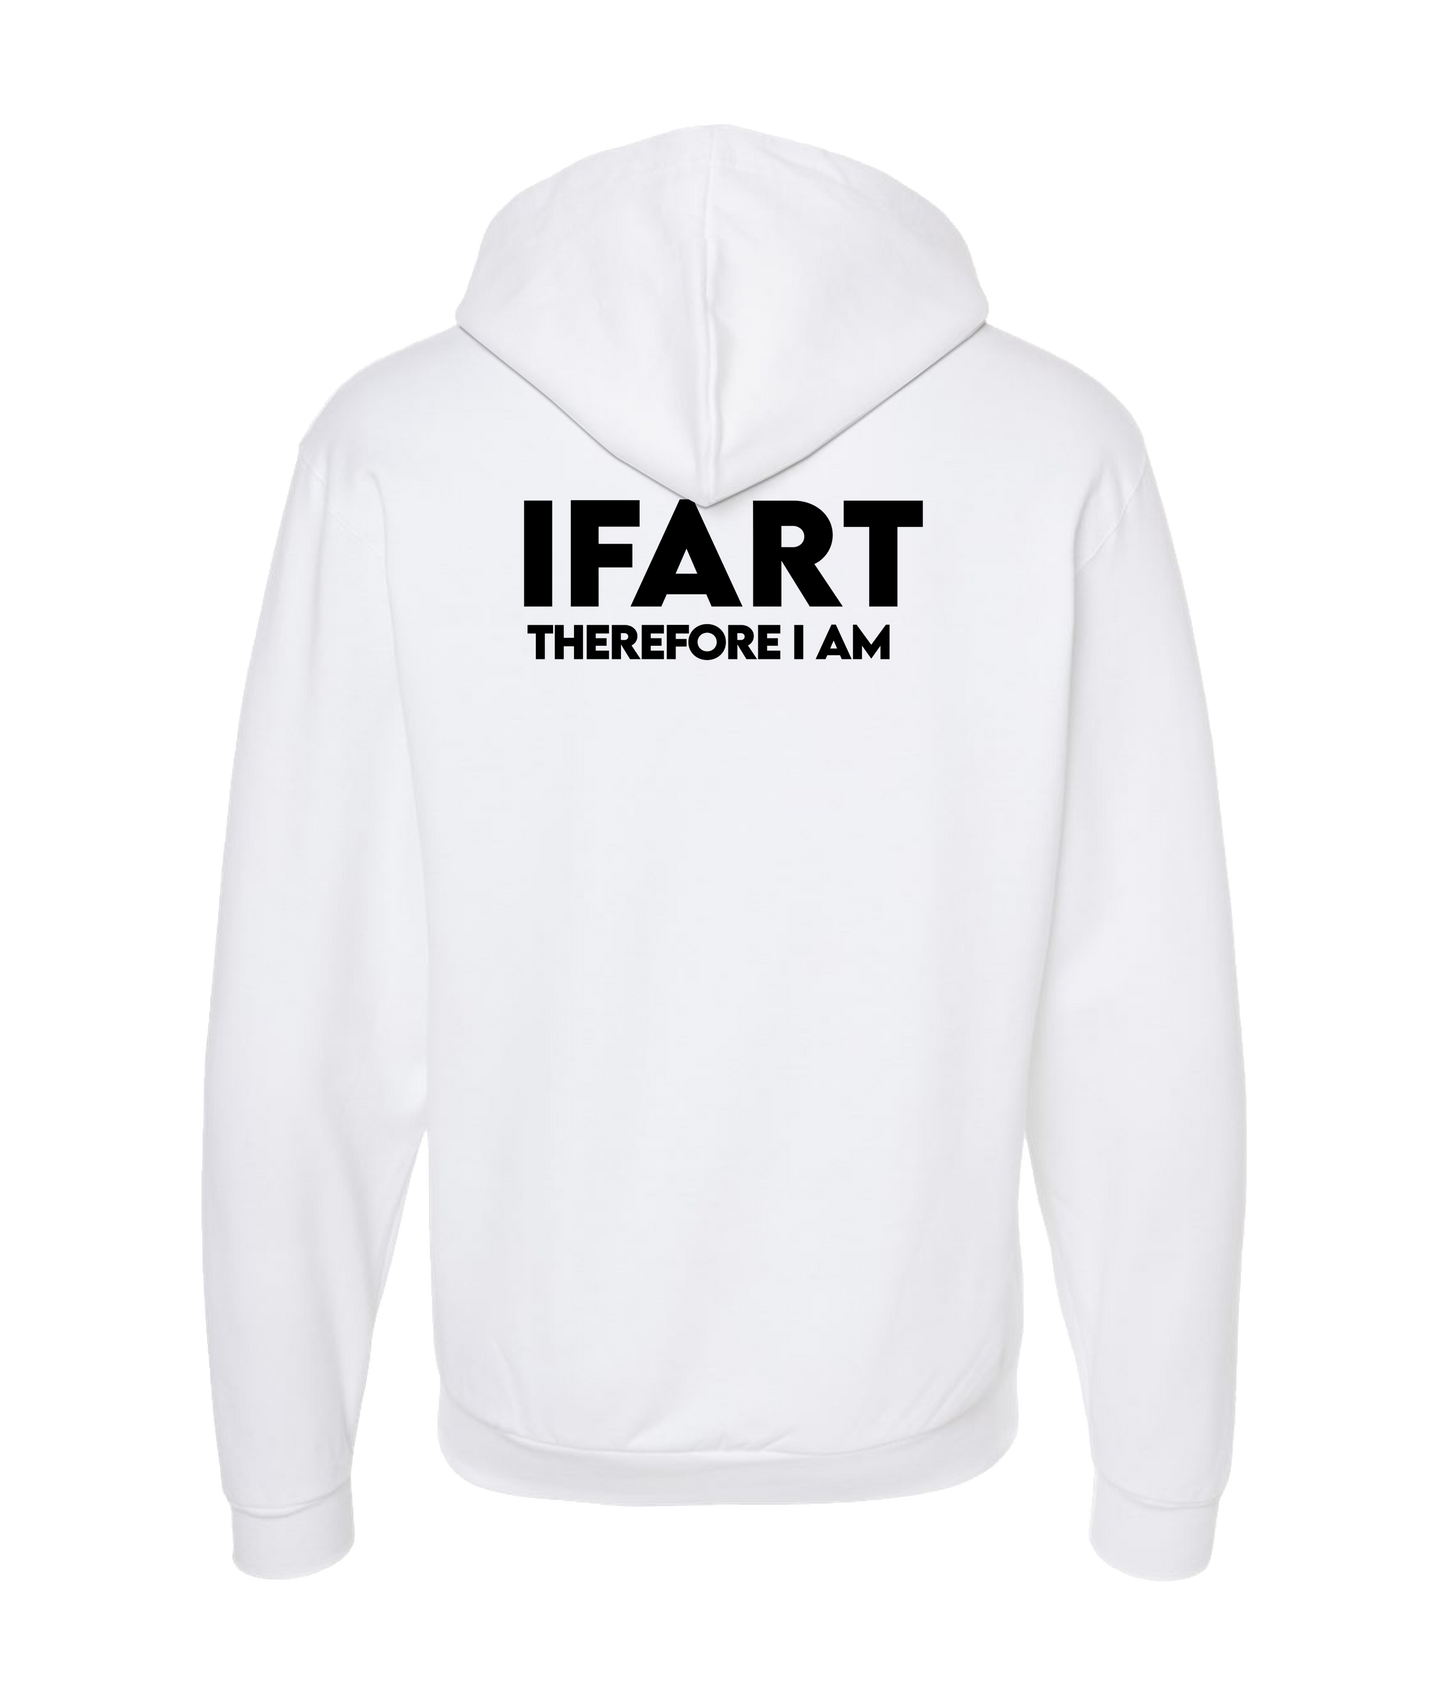 iFart - THEREFORE I AM - White Zip Up Hoodie